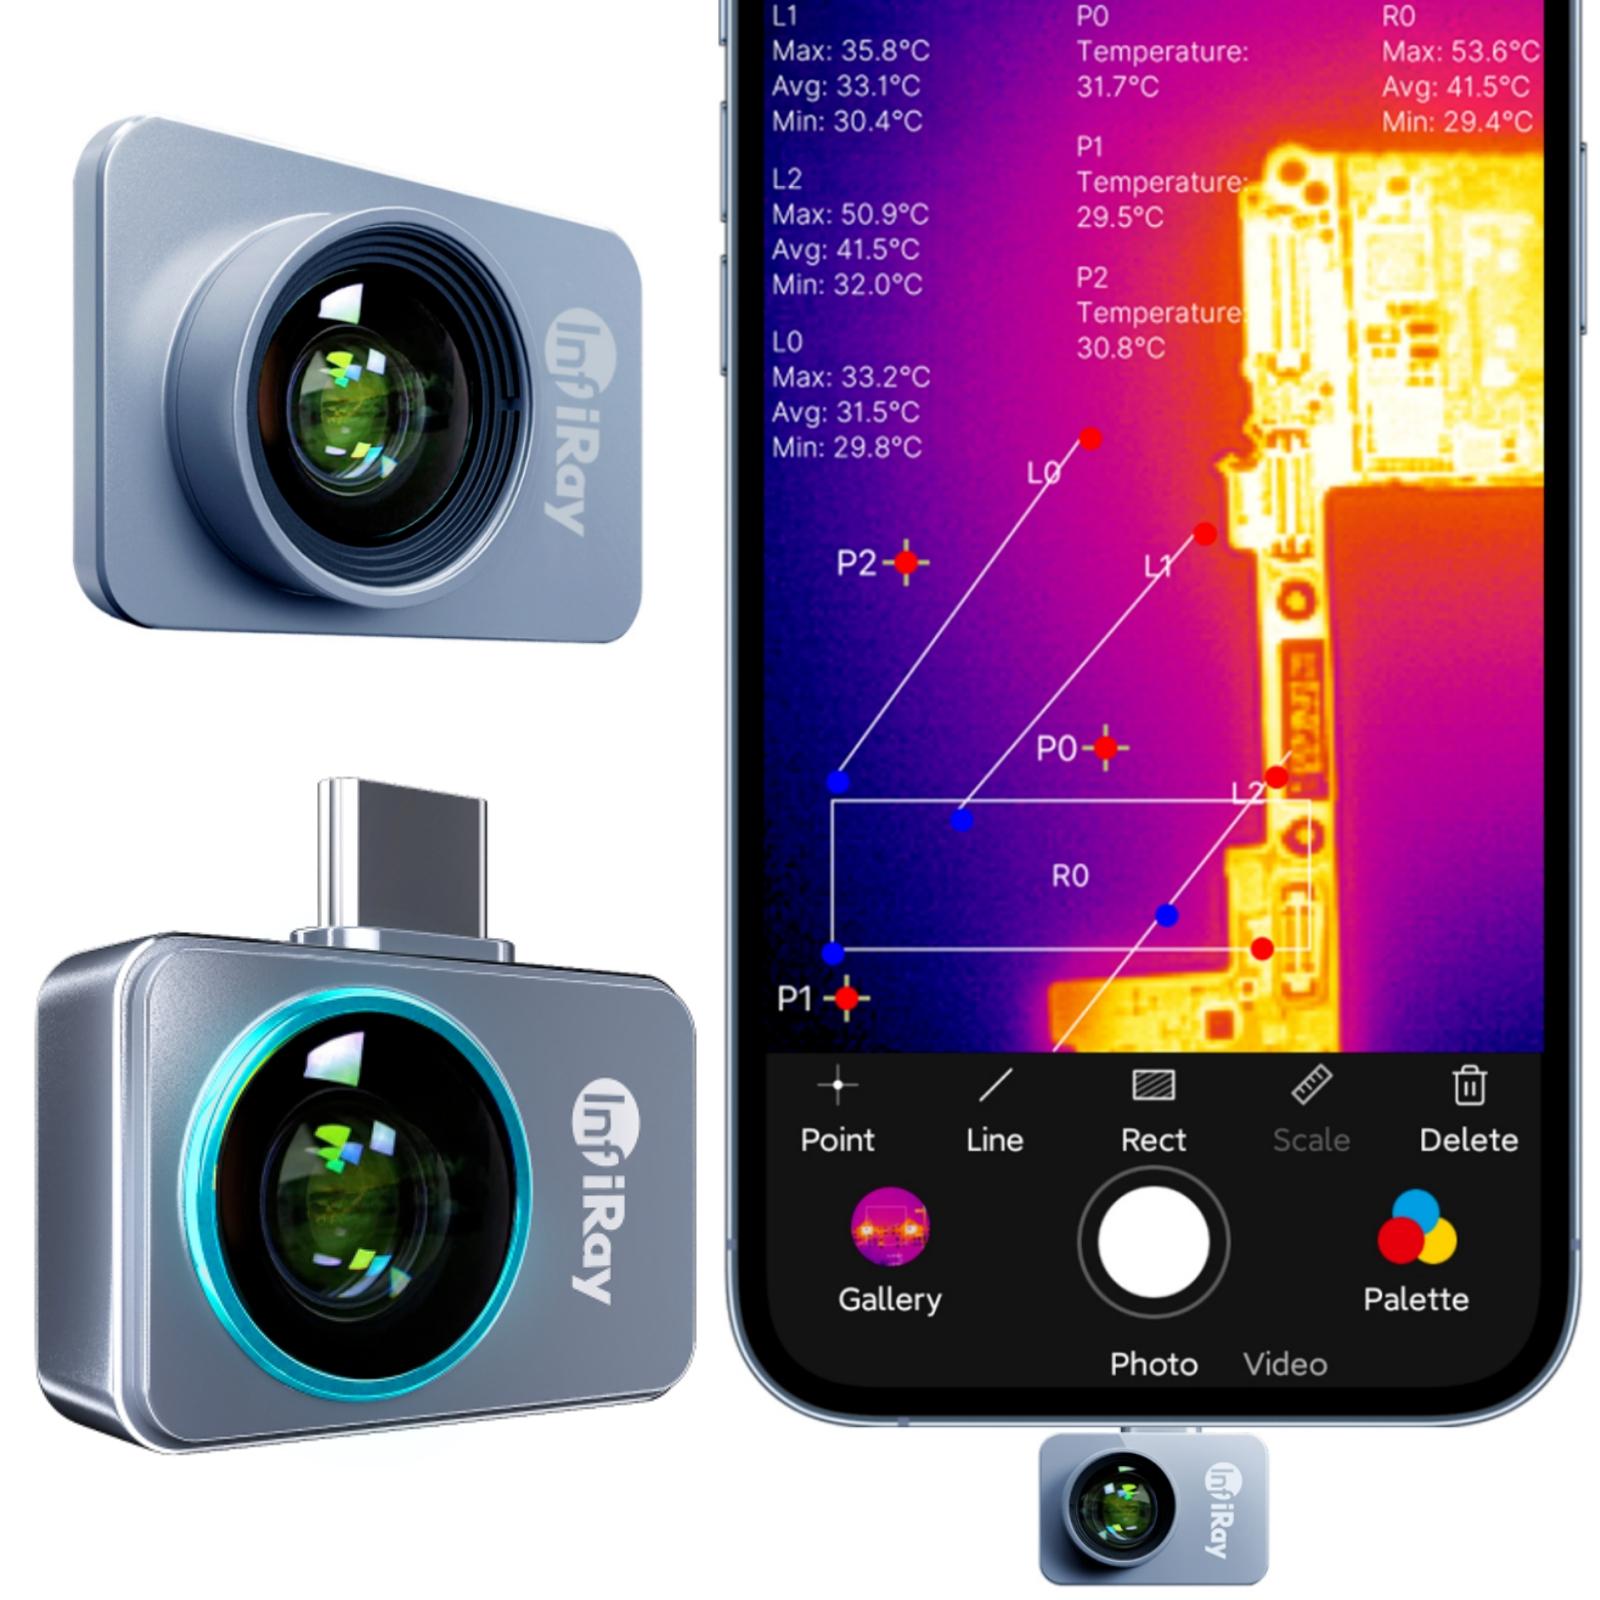 The InfiRay P2 Pro Thermal Imager Review